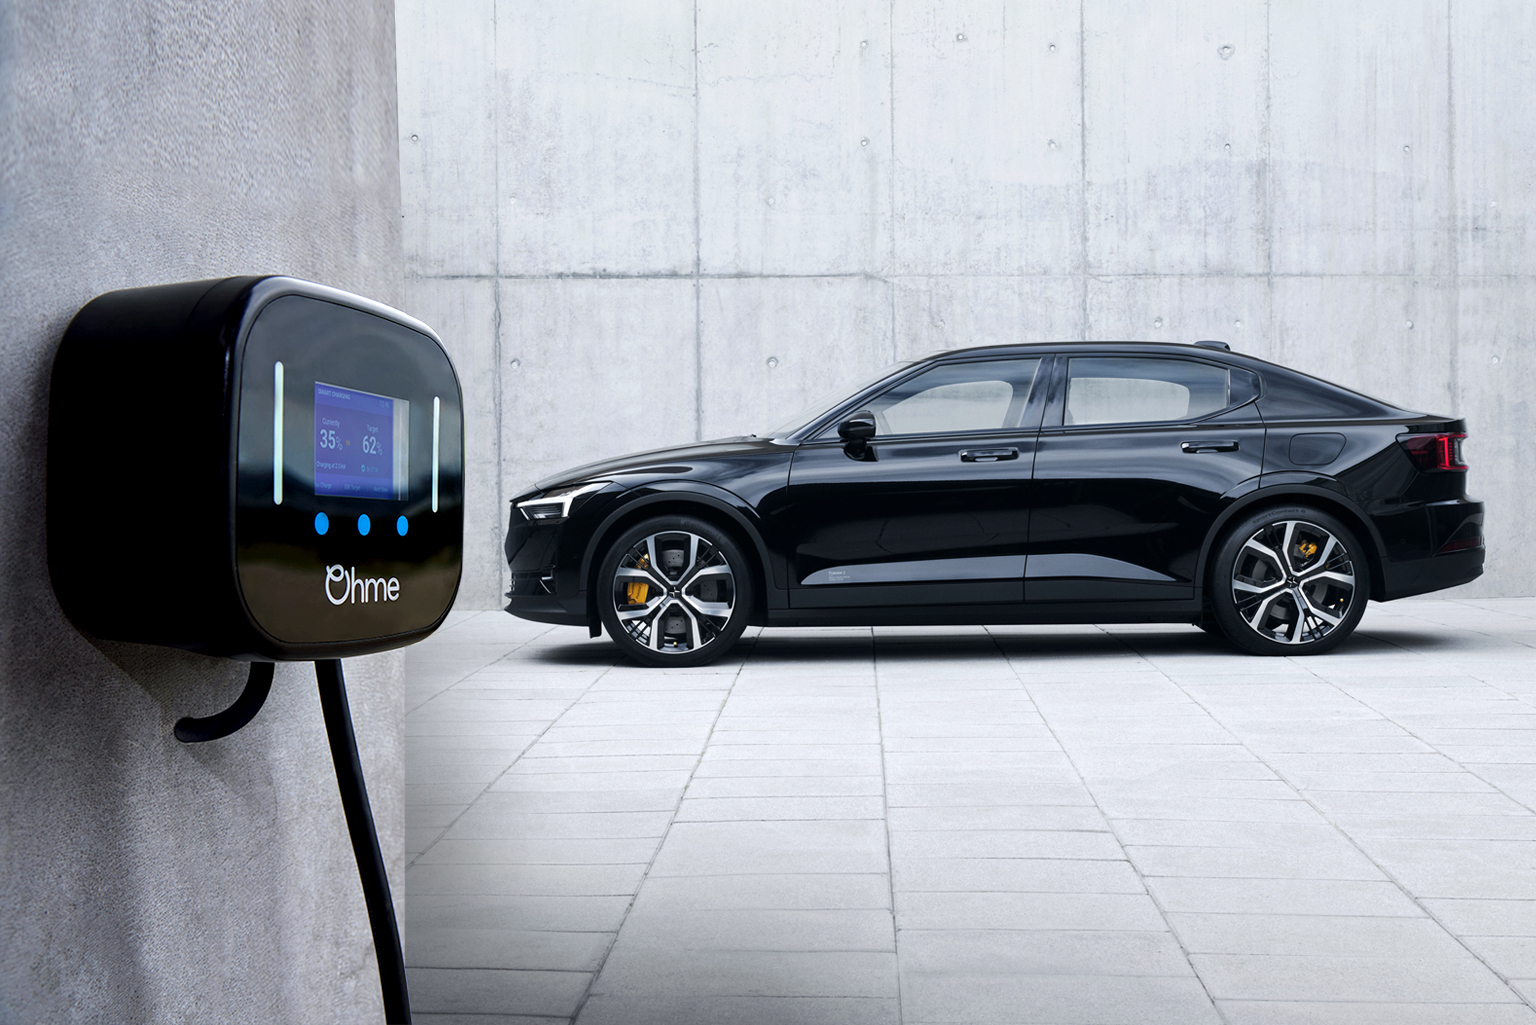 Ohme partners with Polestar